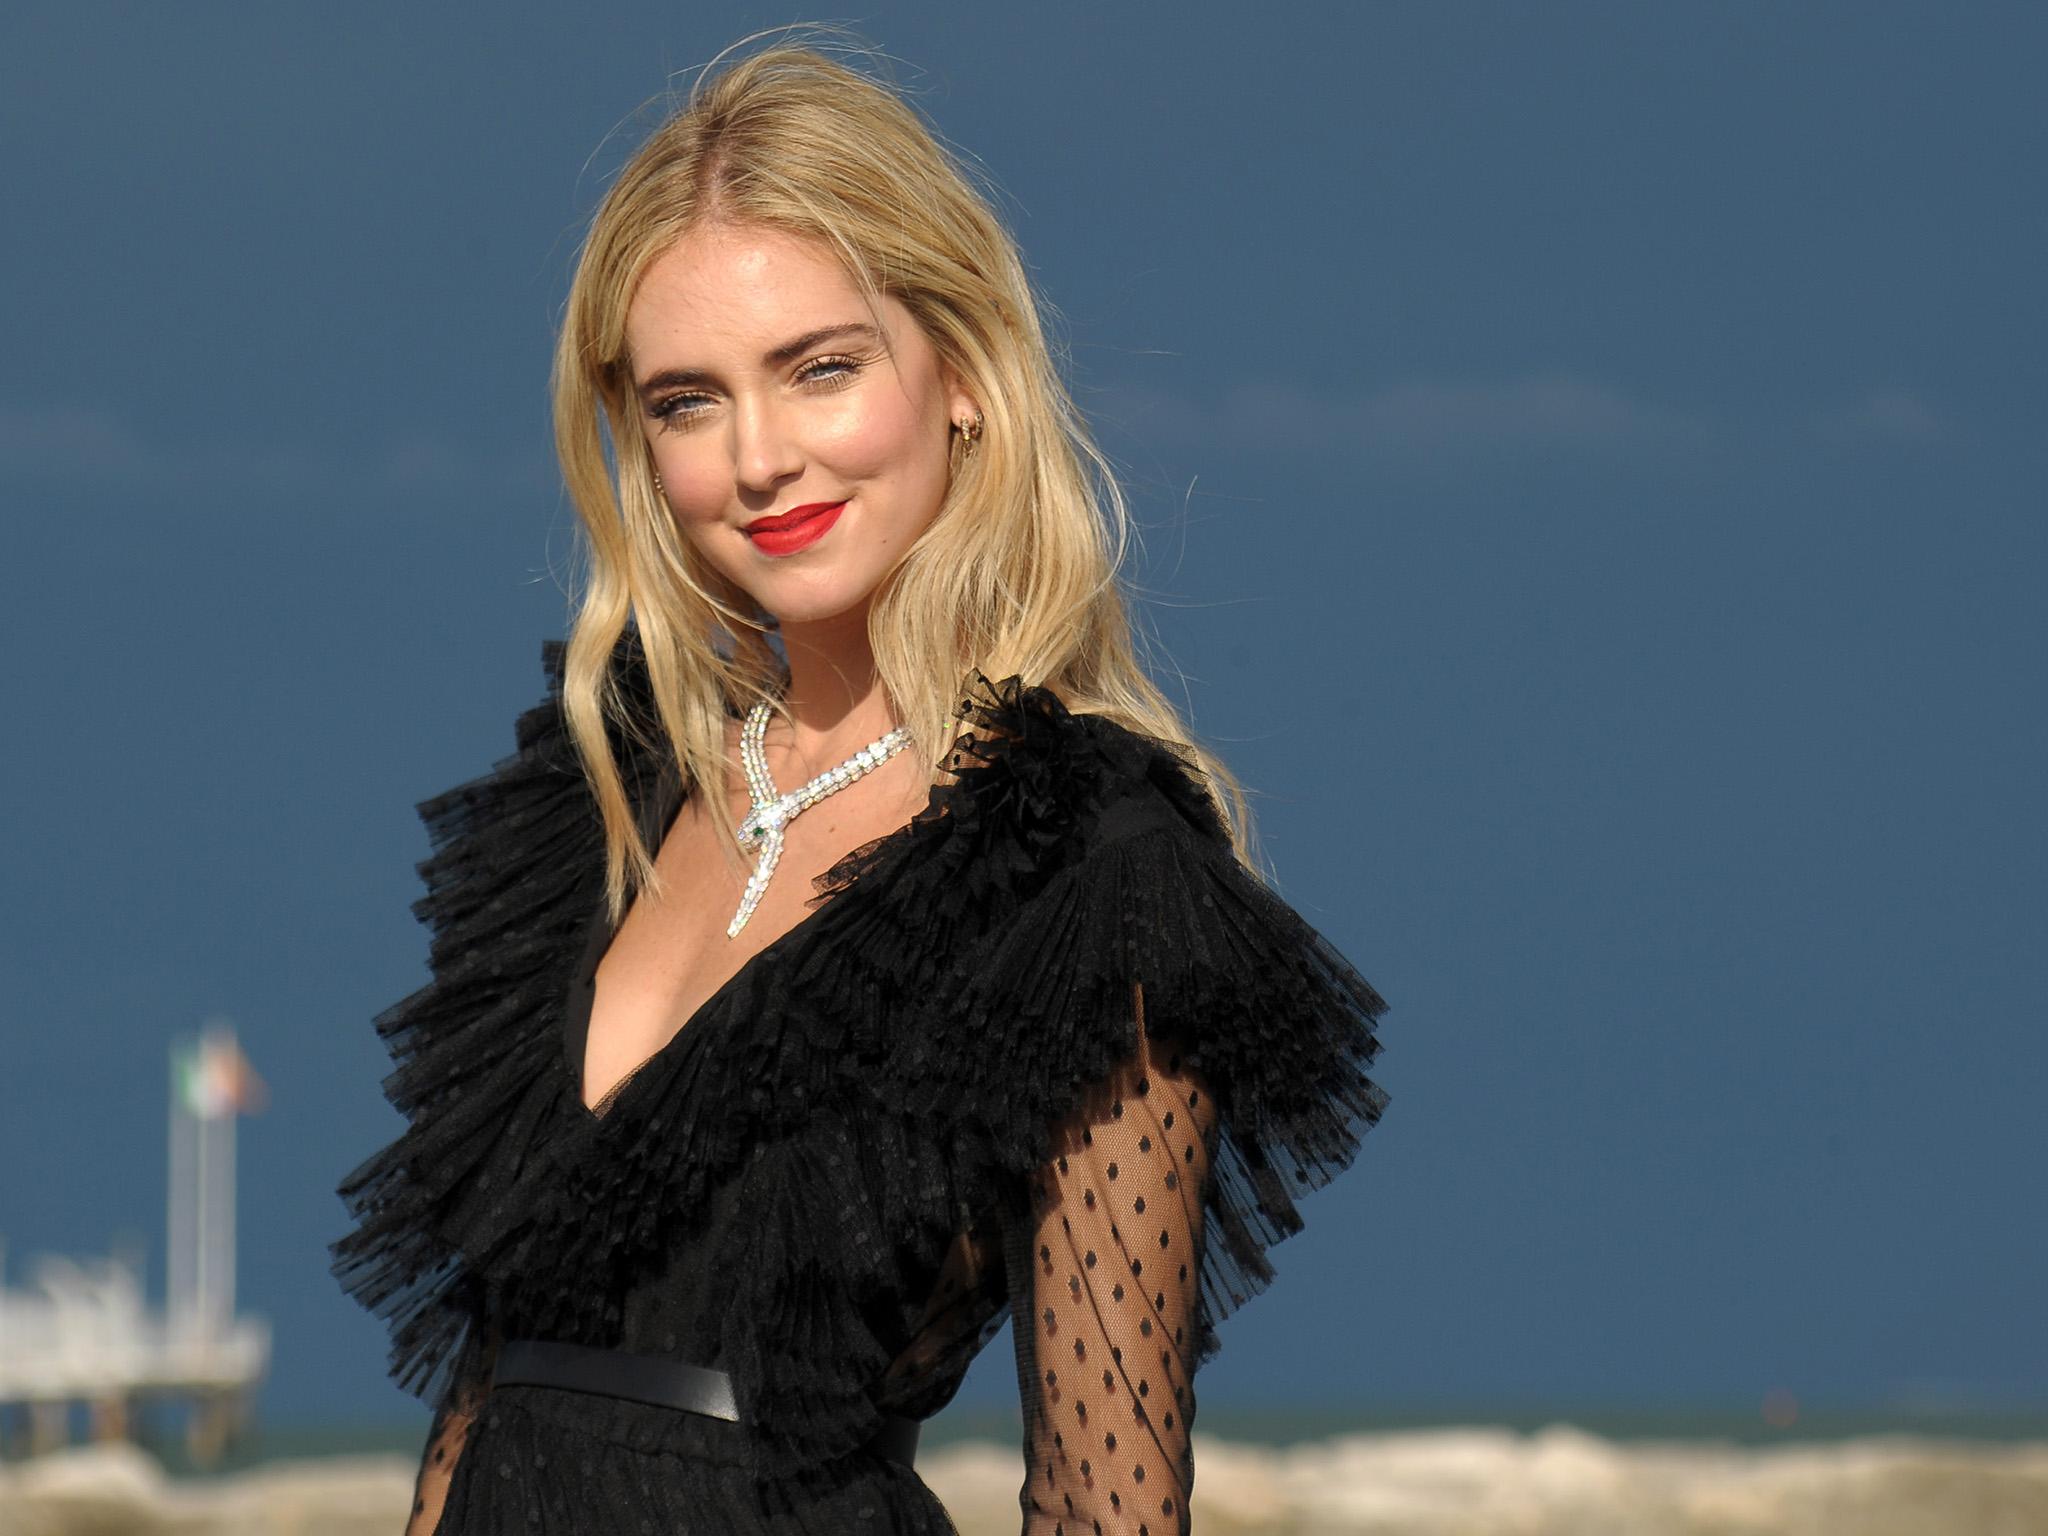 With 10.3 million Instagram followers, her own fashion line and being featured on the Forbes list twice, we best get use to seeing Chiara Ferragni's face on front row seats